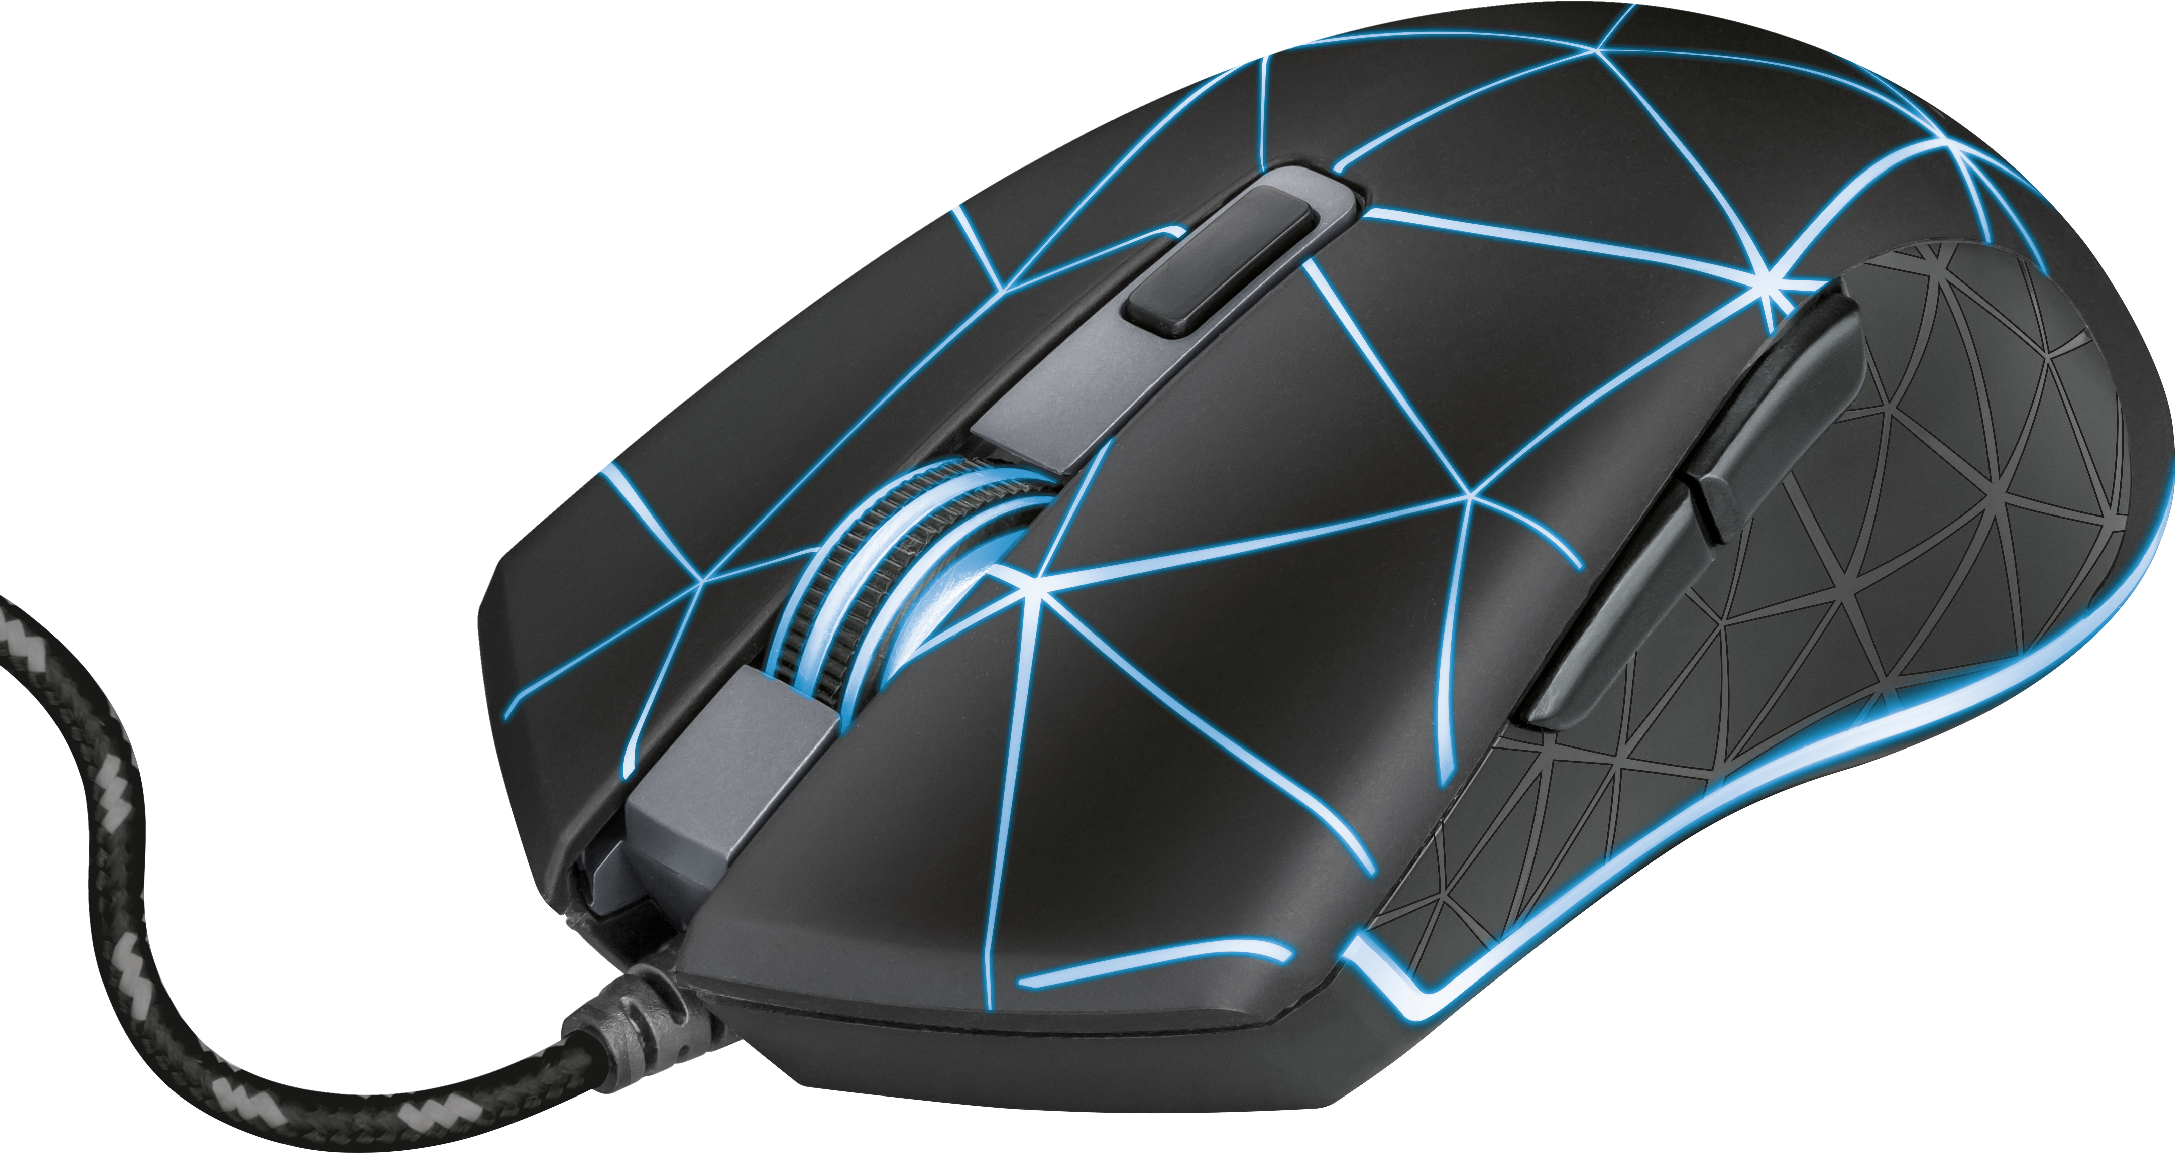 TRUST GXT 133 Locx Gaming Mouse 22988 black